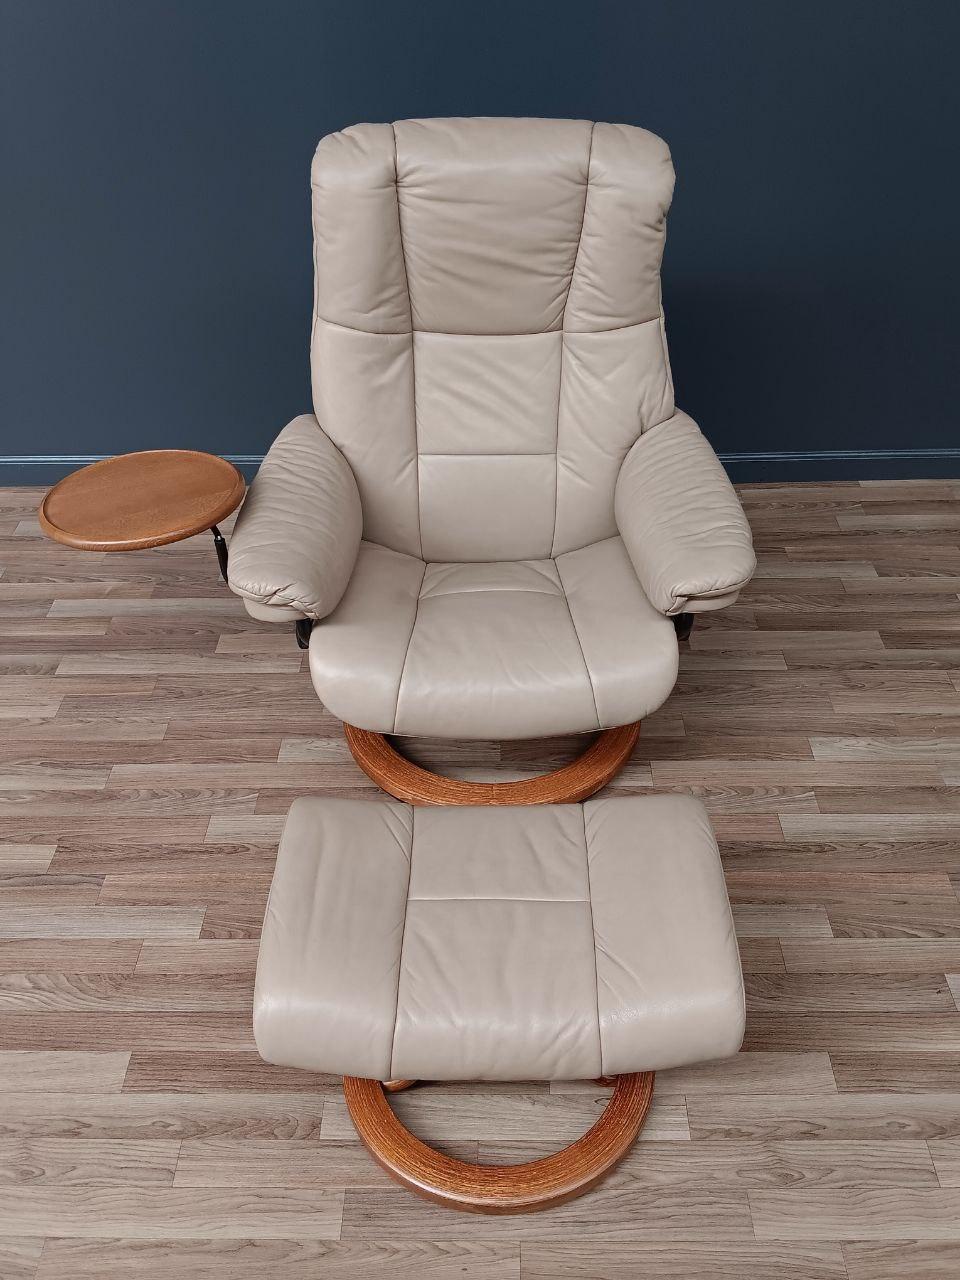 Swedish Ekornes Stressless Tan Leather Reclining Swivel Lounge Chair with End Table & Ot